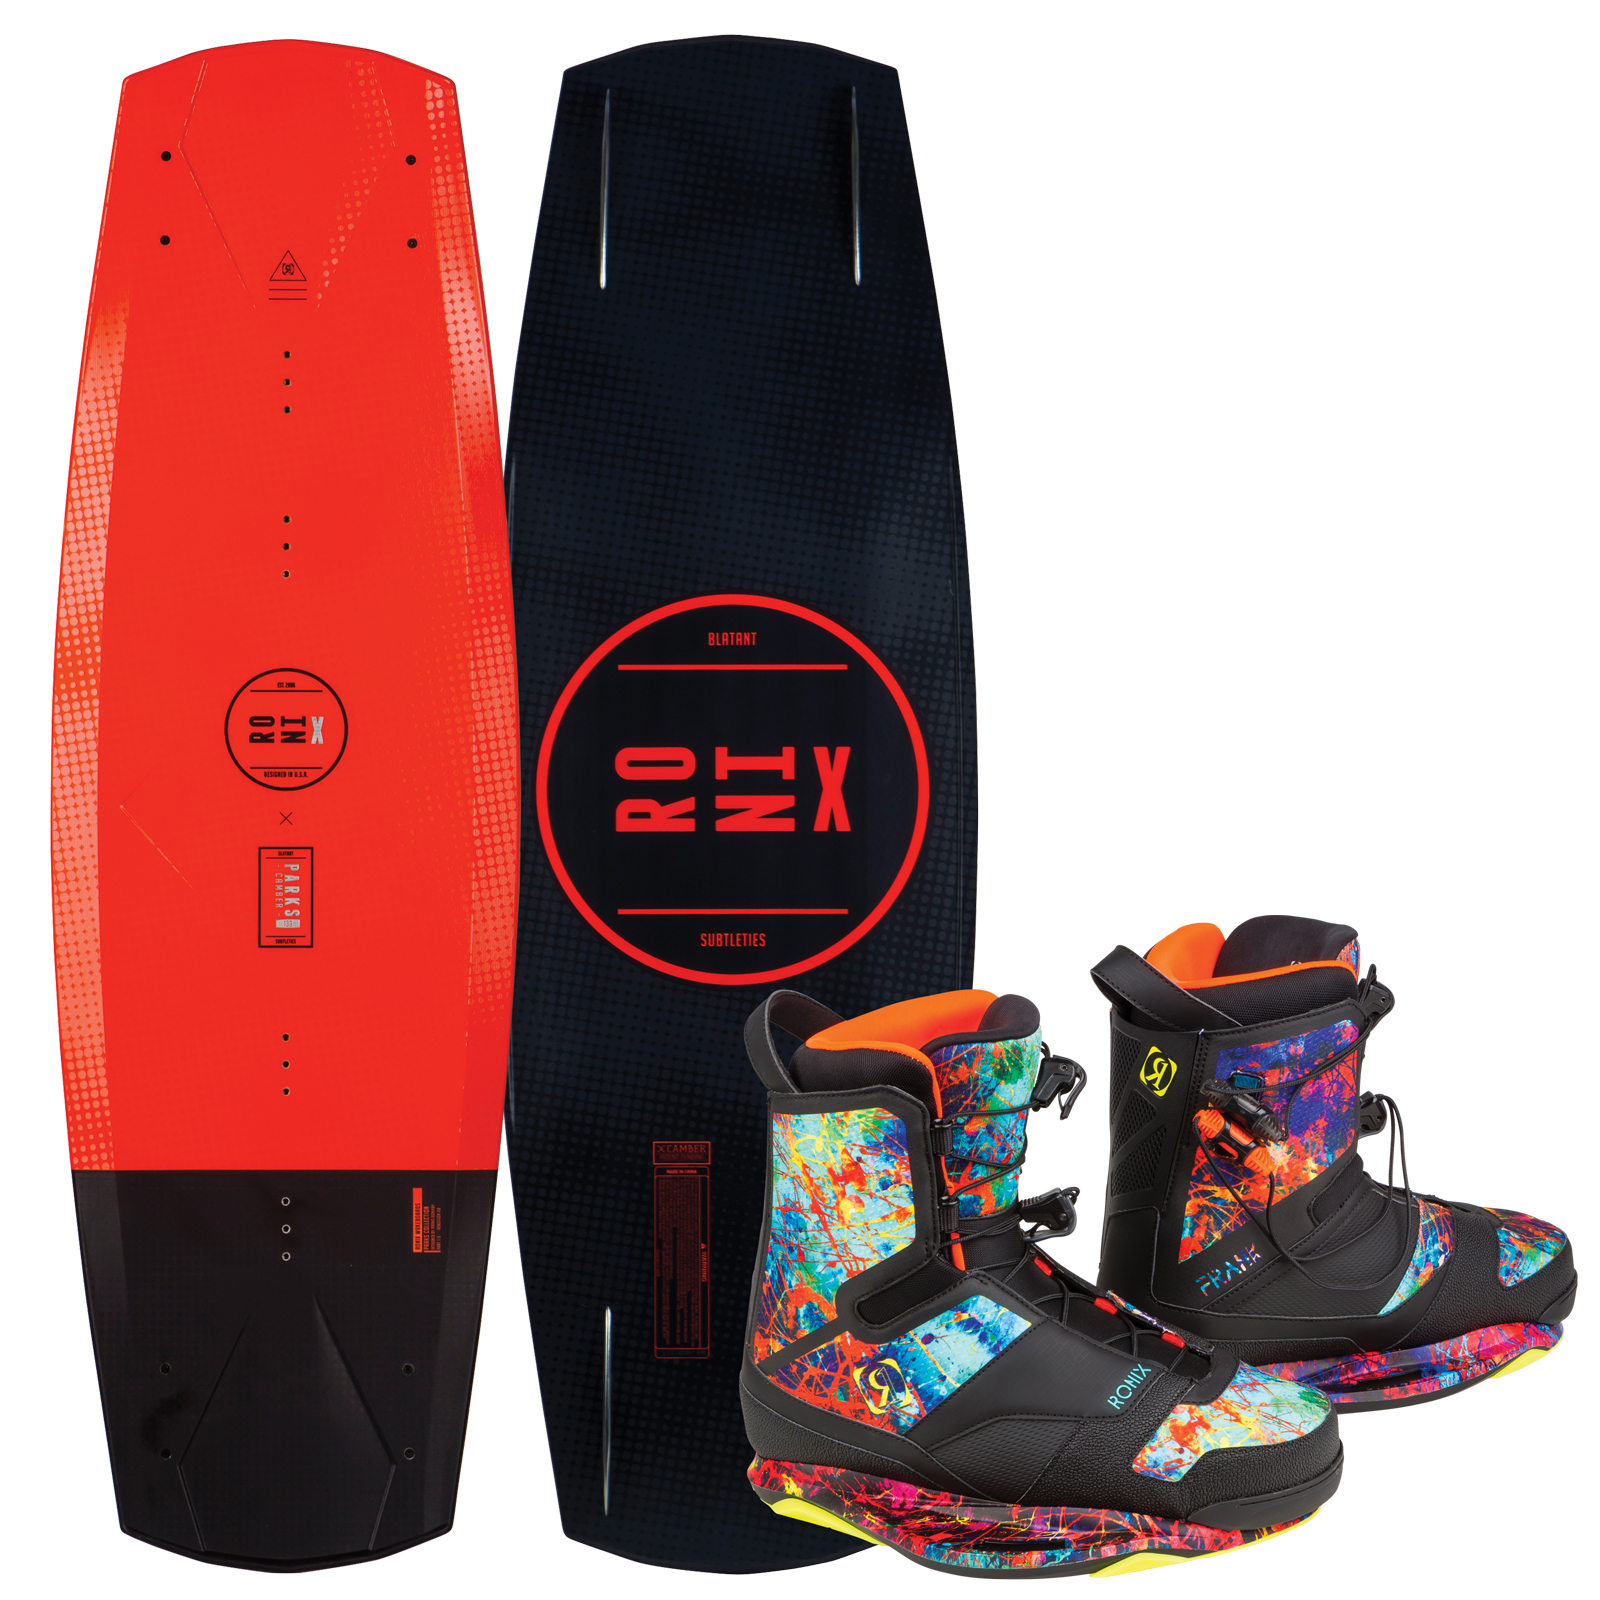   PARKS MODELLO 134 W/ FRANK PACKAGE RONIX 2017